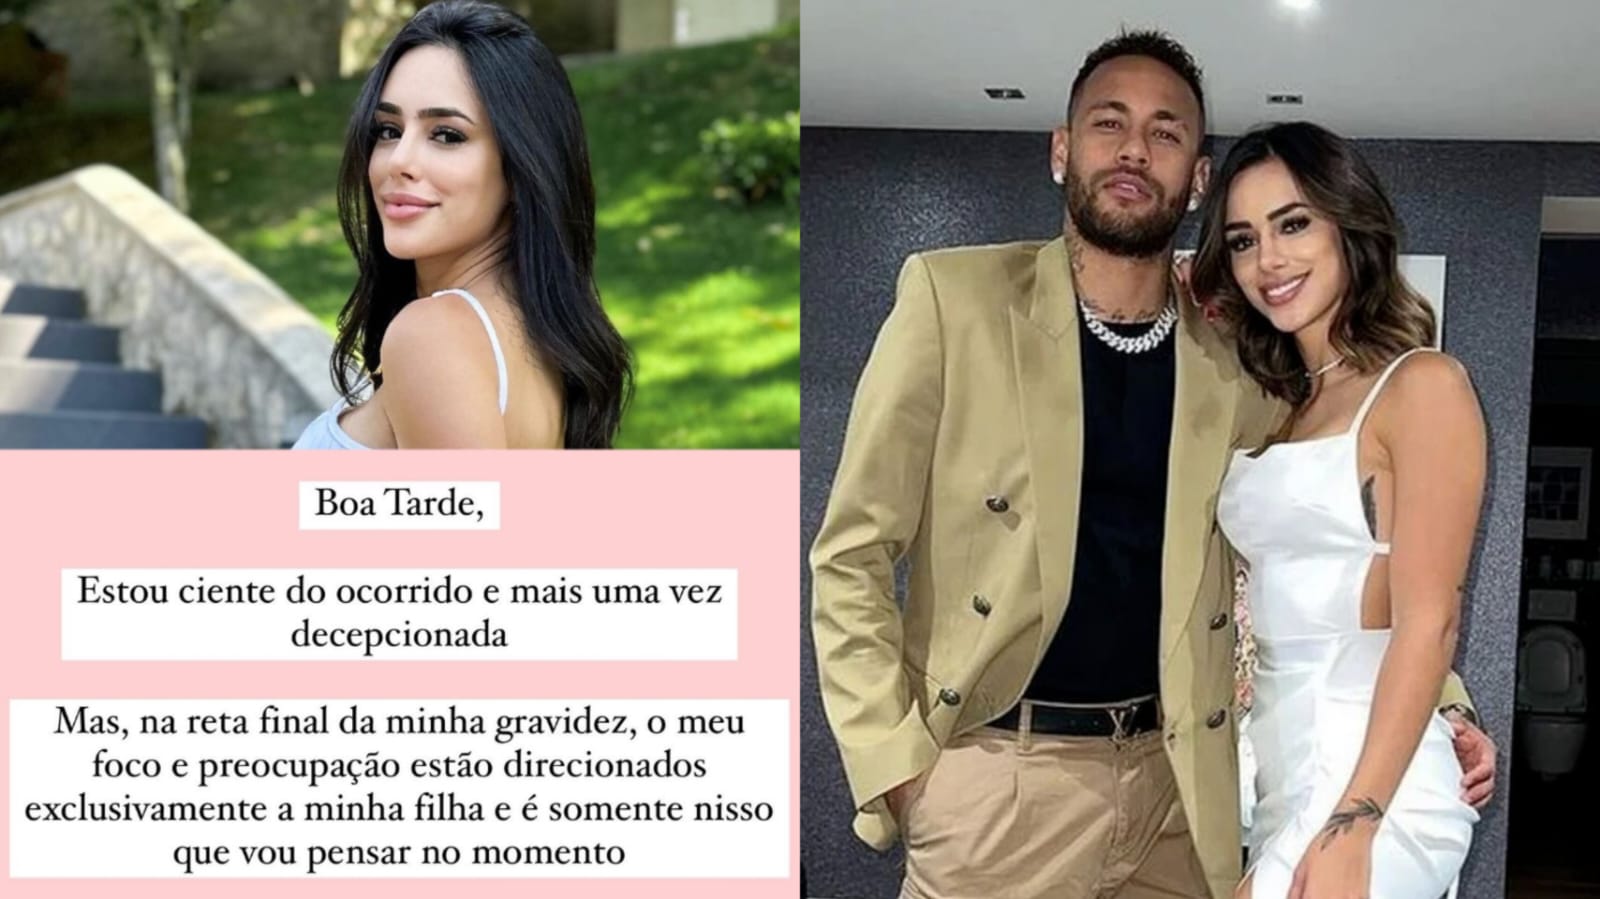 Bruna Biancardi speaks out after Neymar’s video at a club: ‘once again disappointed’